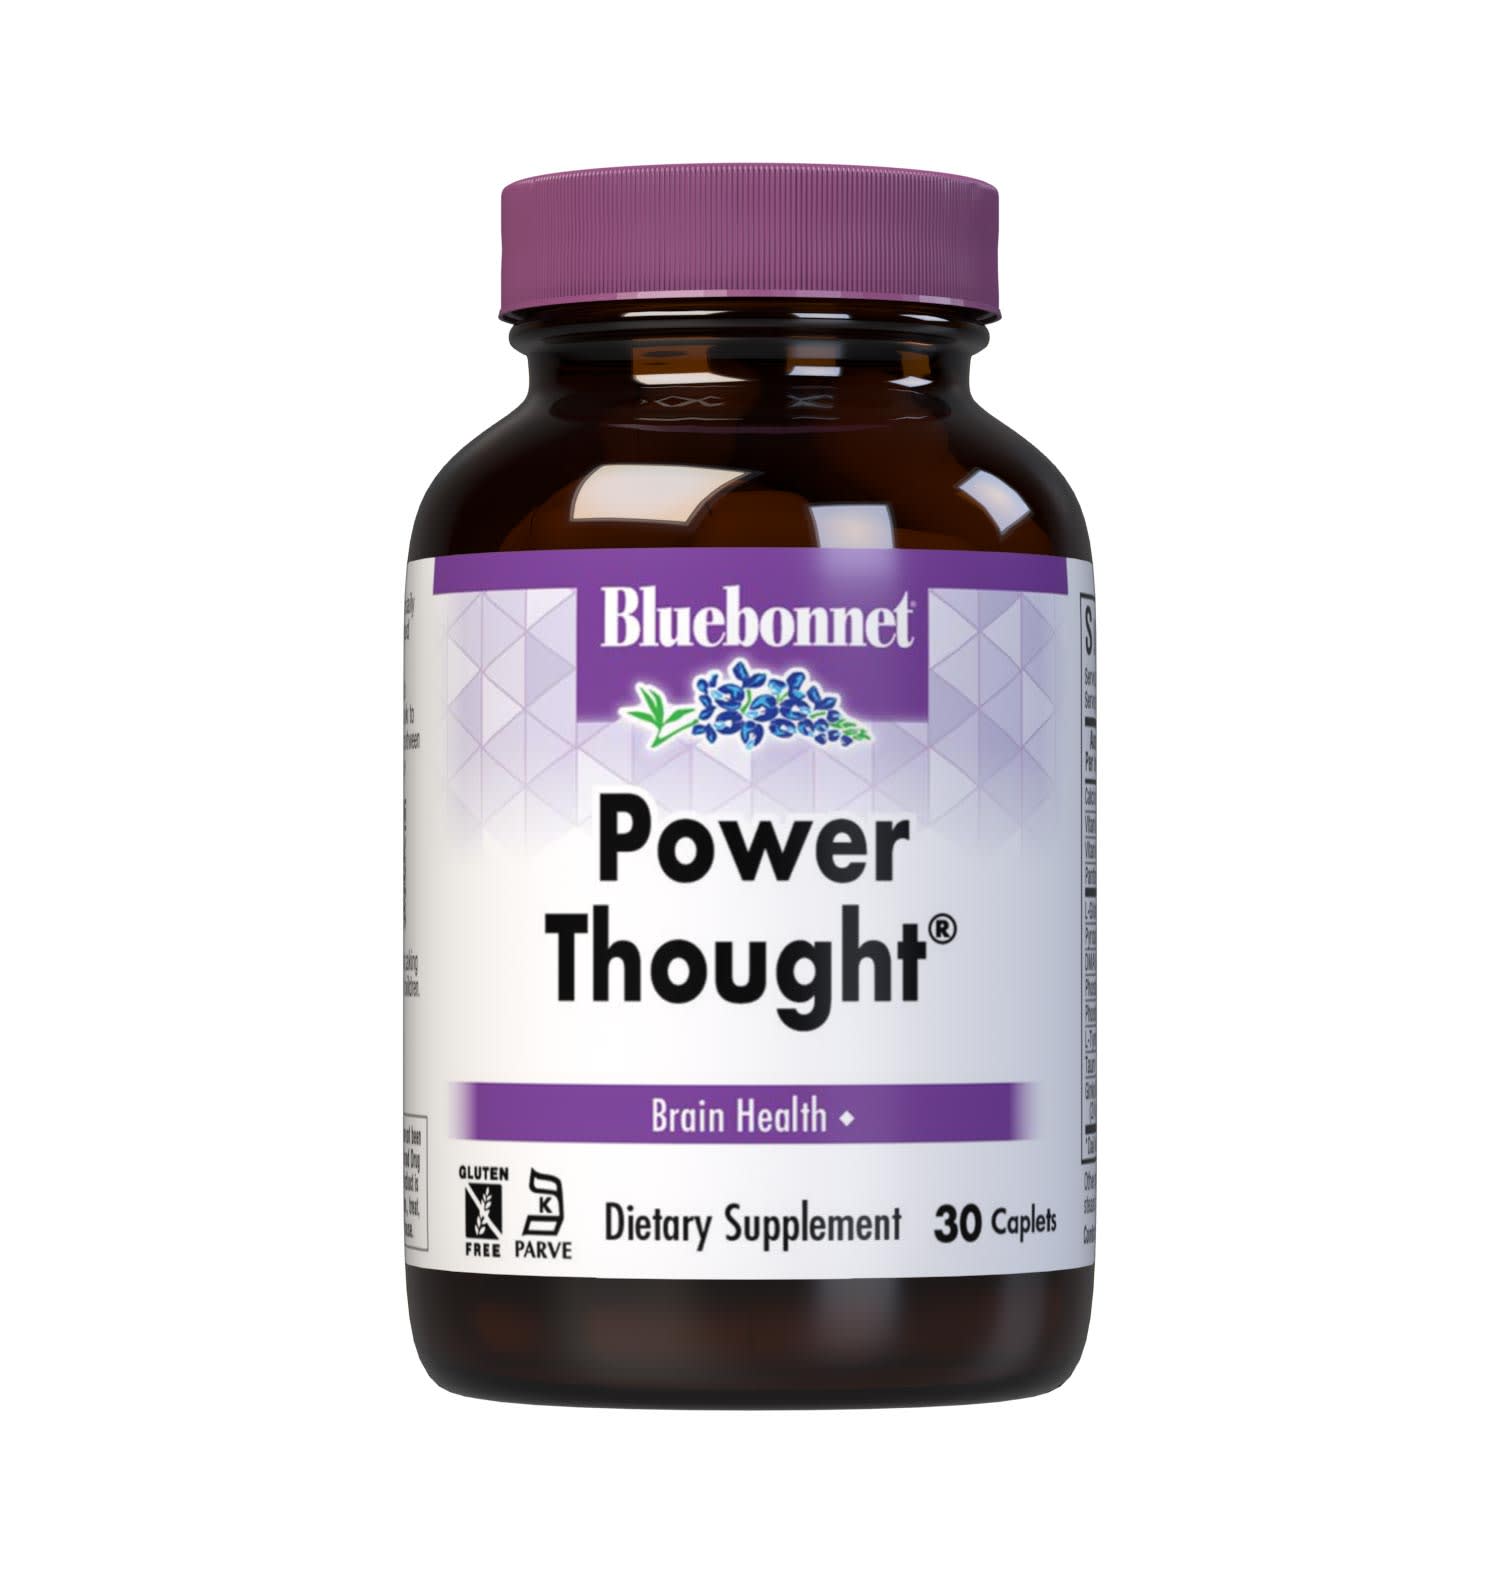 Bluebonnet’s Power Thought 30 Caplets are scientifically formulated with a powerful spectrum of highly advanced cognitive-enhancing nutrients, including sustainably-sourced botanicals, DMAE, phosphatidylserine and phosphatidylcholine, for optimal brain health. This complementary blend works to facilitate the communication between nerve cells, thereby enhancing the brain's ability to process, retain, and retrieve information for healthy cognitive function. #size_30 count